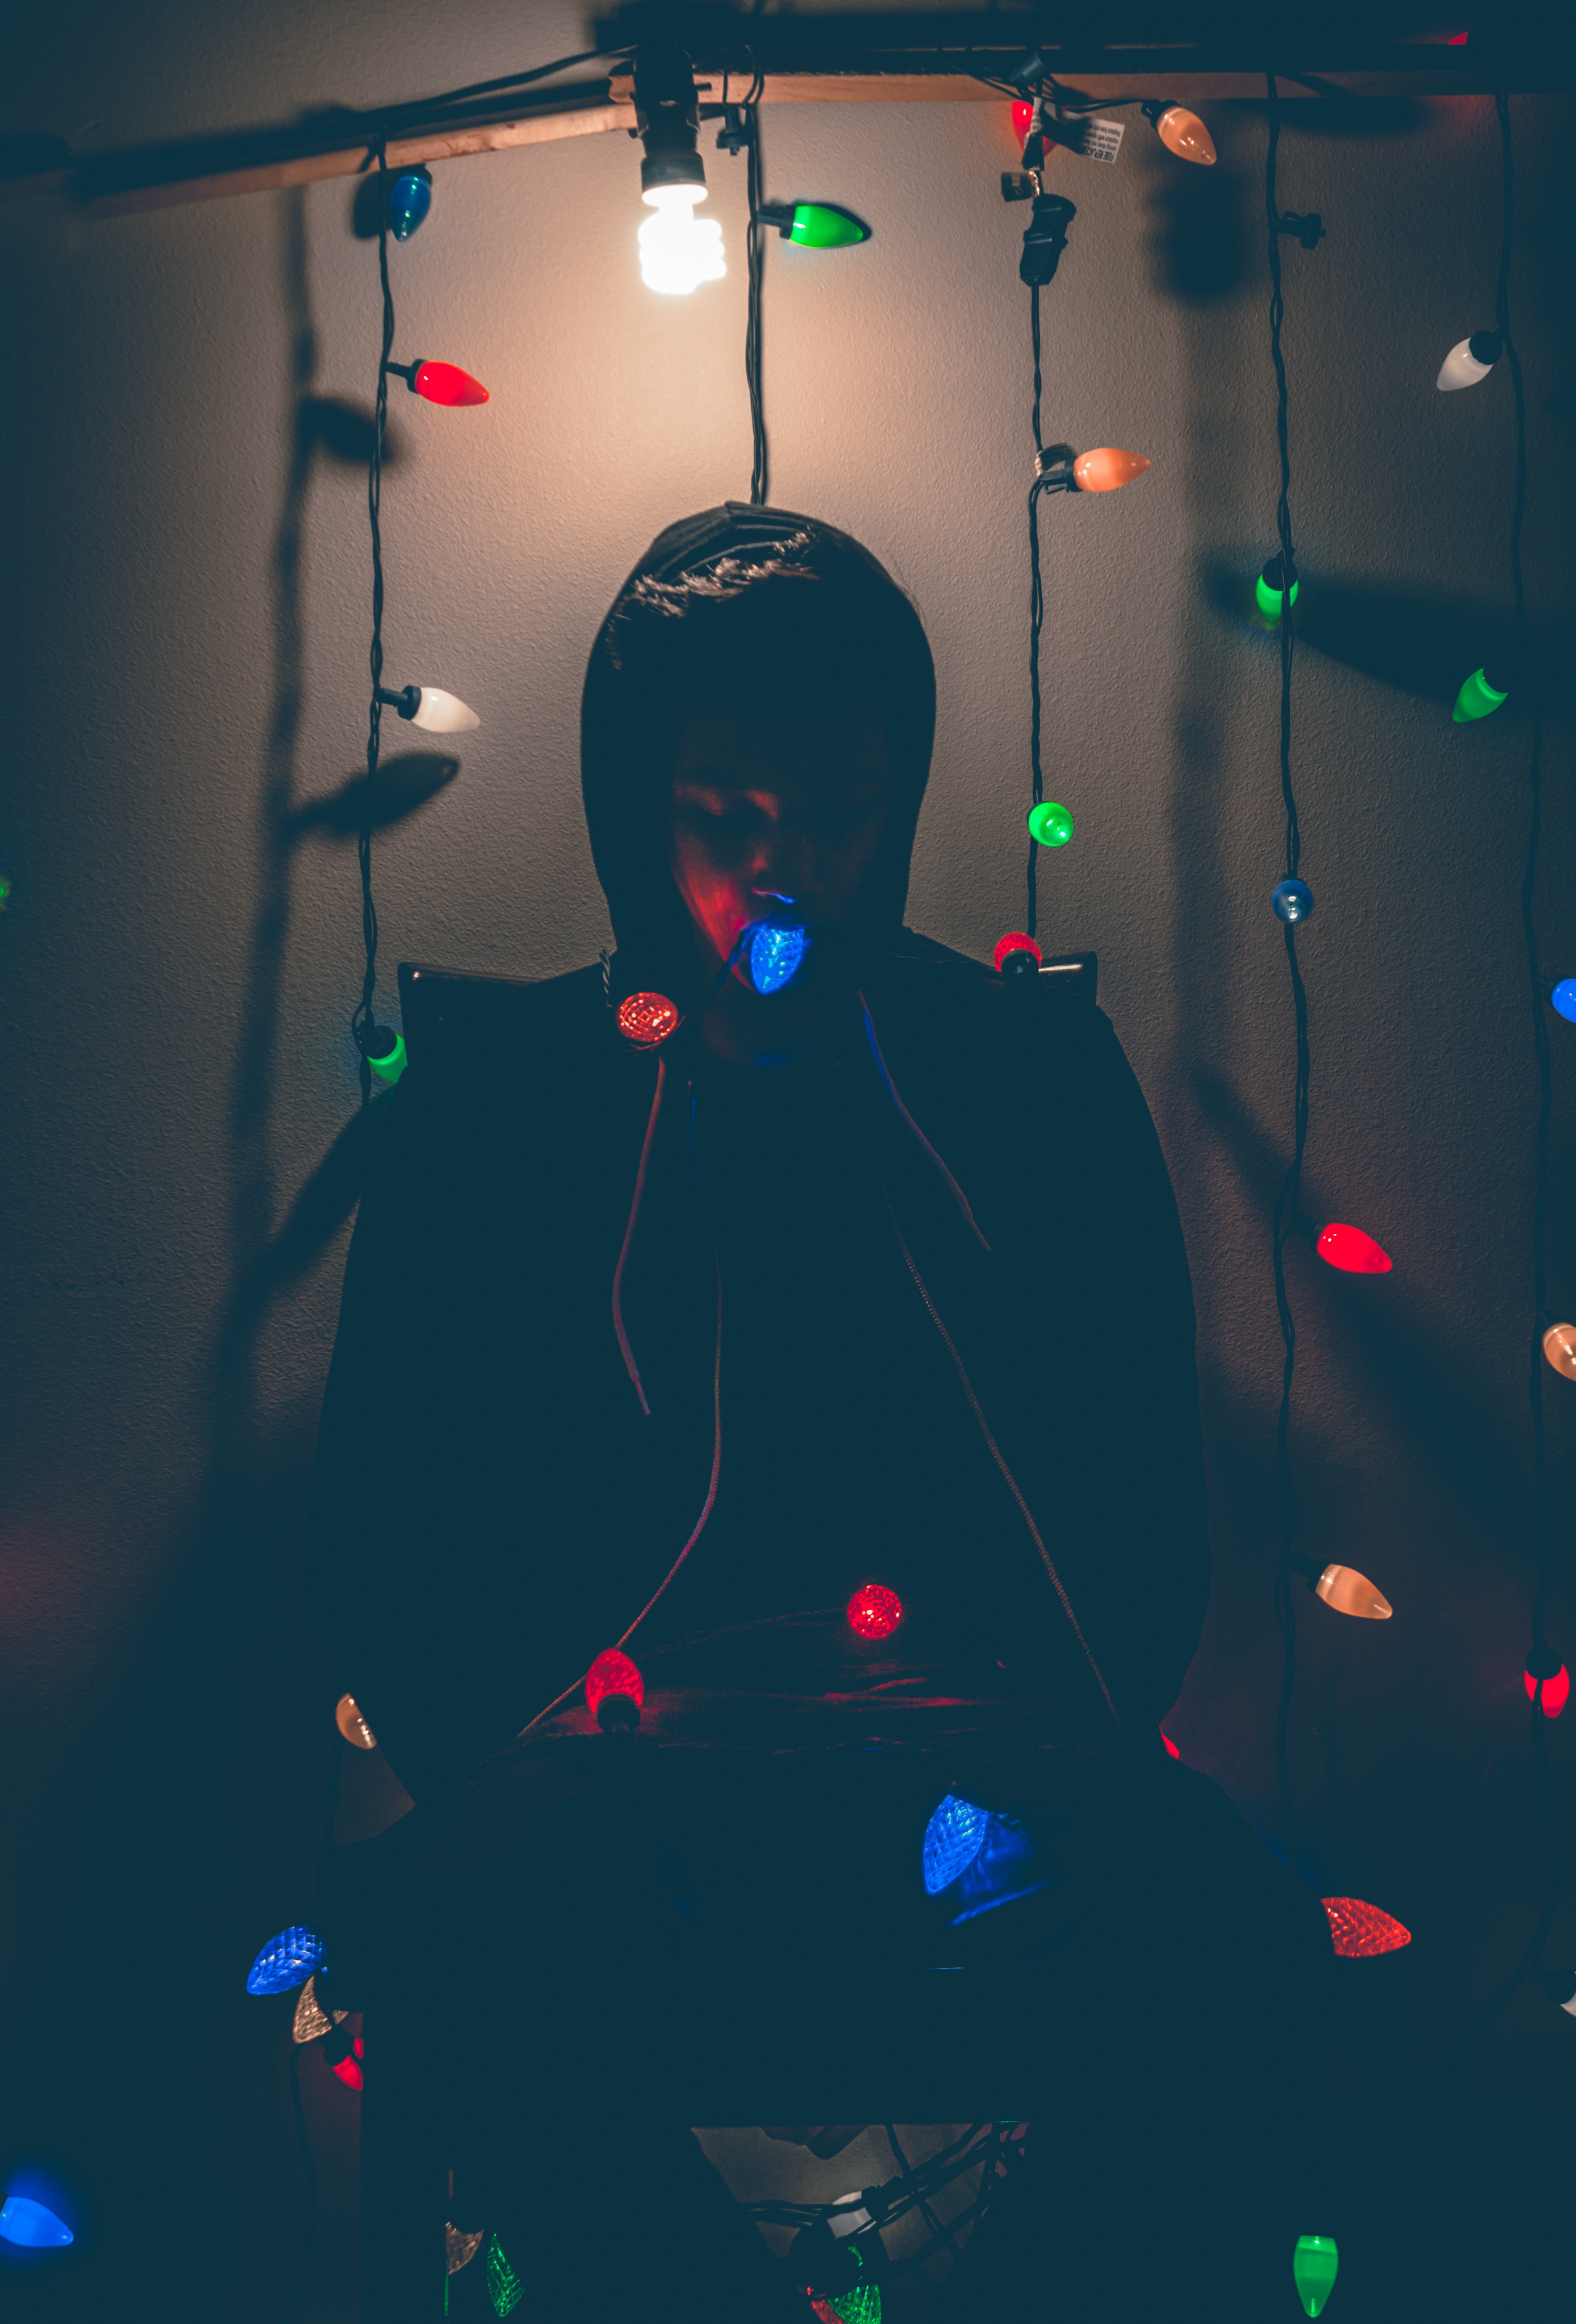 Man Sitting on Chair With Multi-colored String Lights, Background, Glow, Winter, Red, HQ Photo